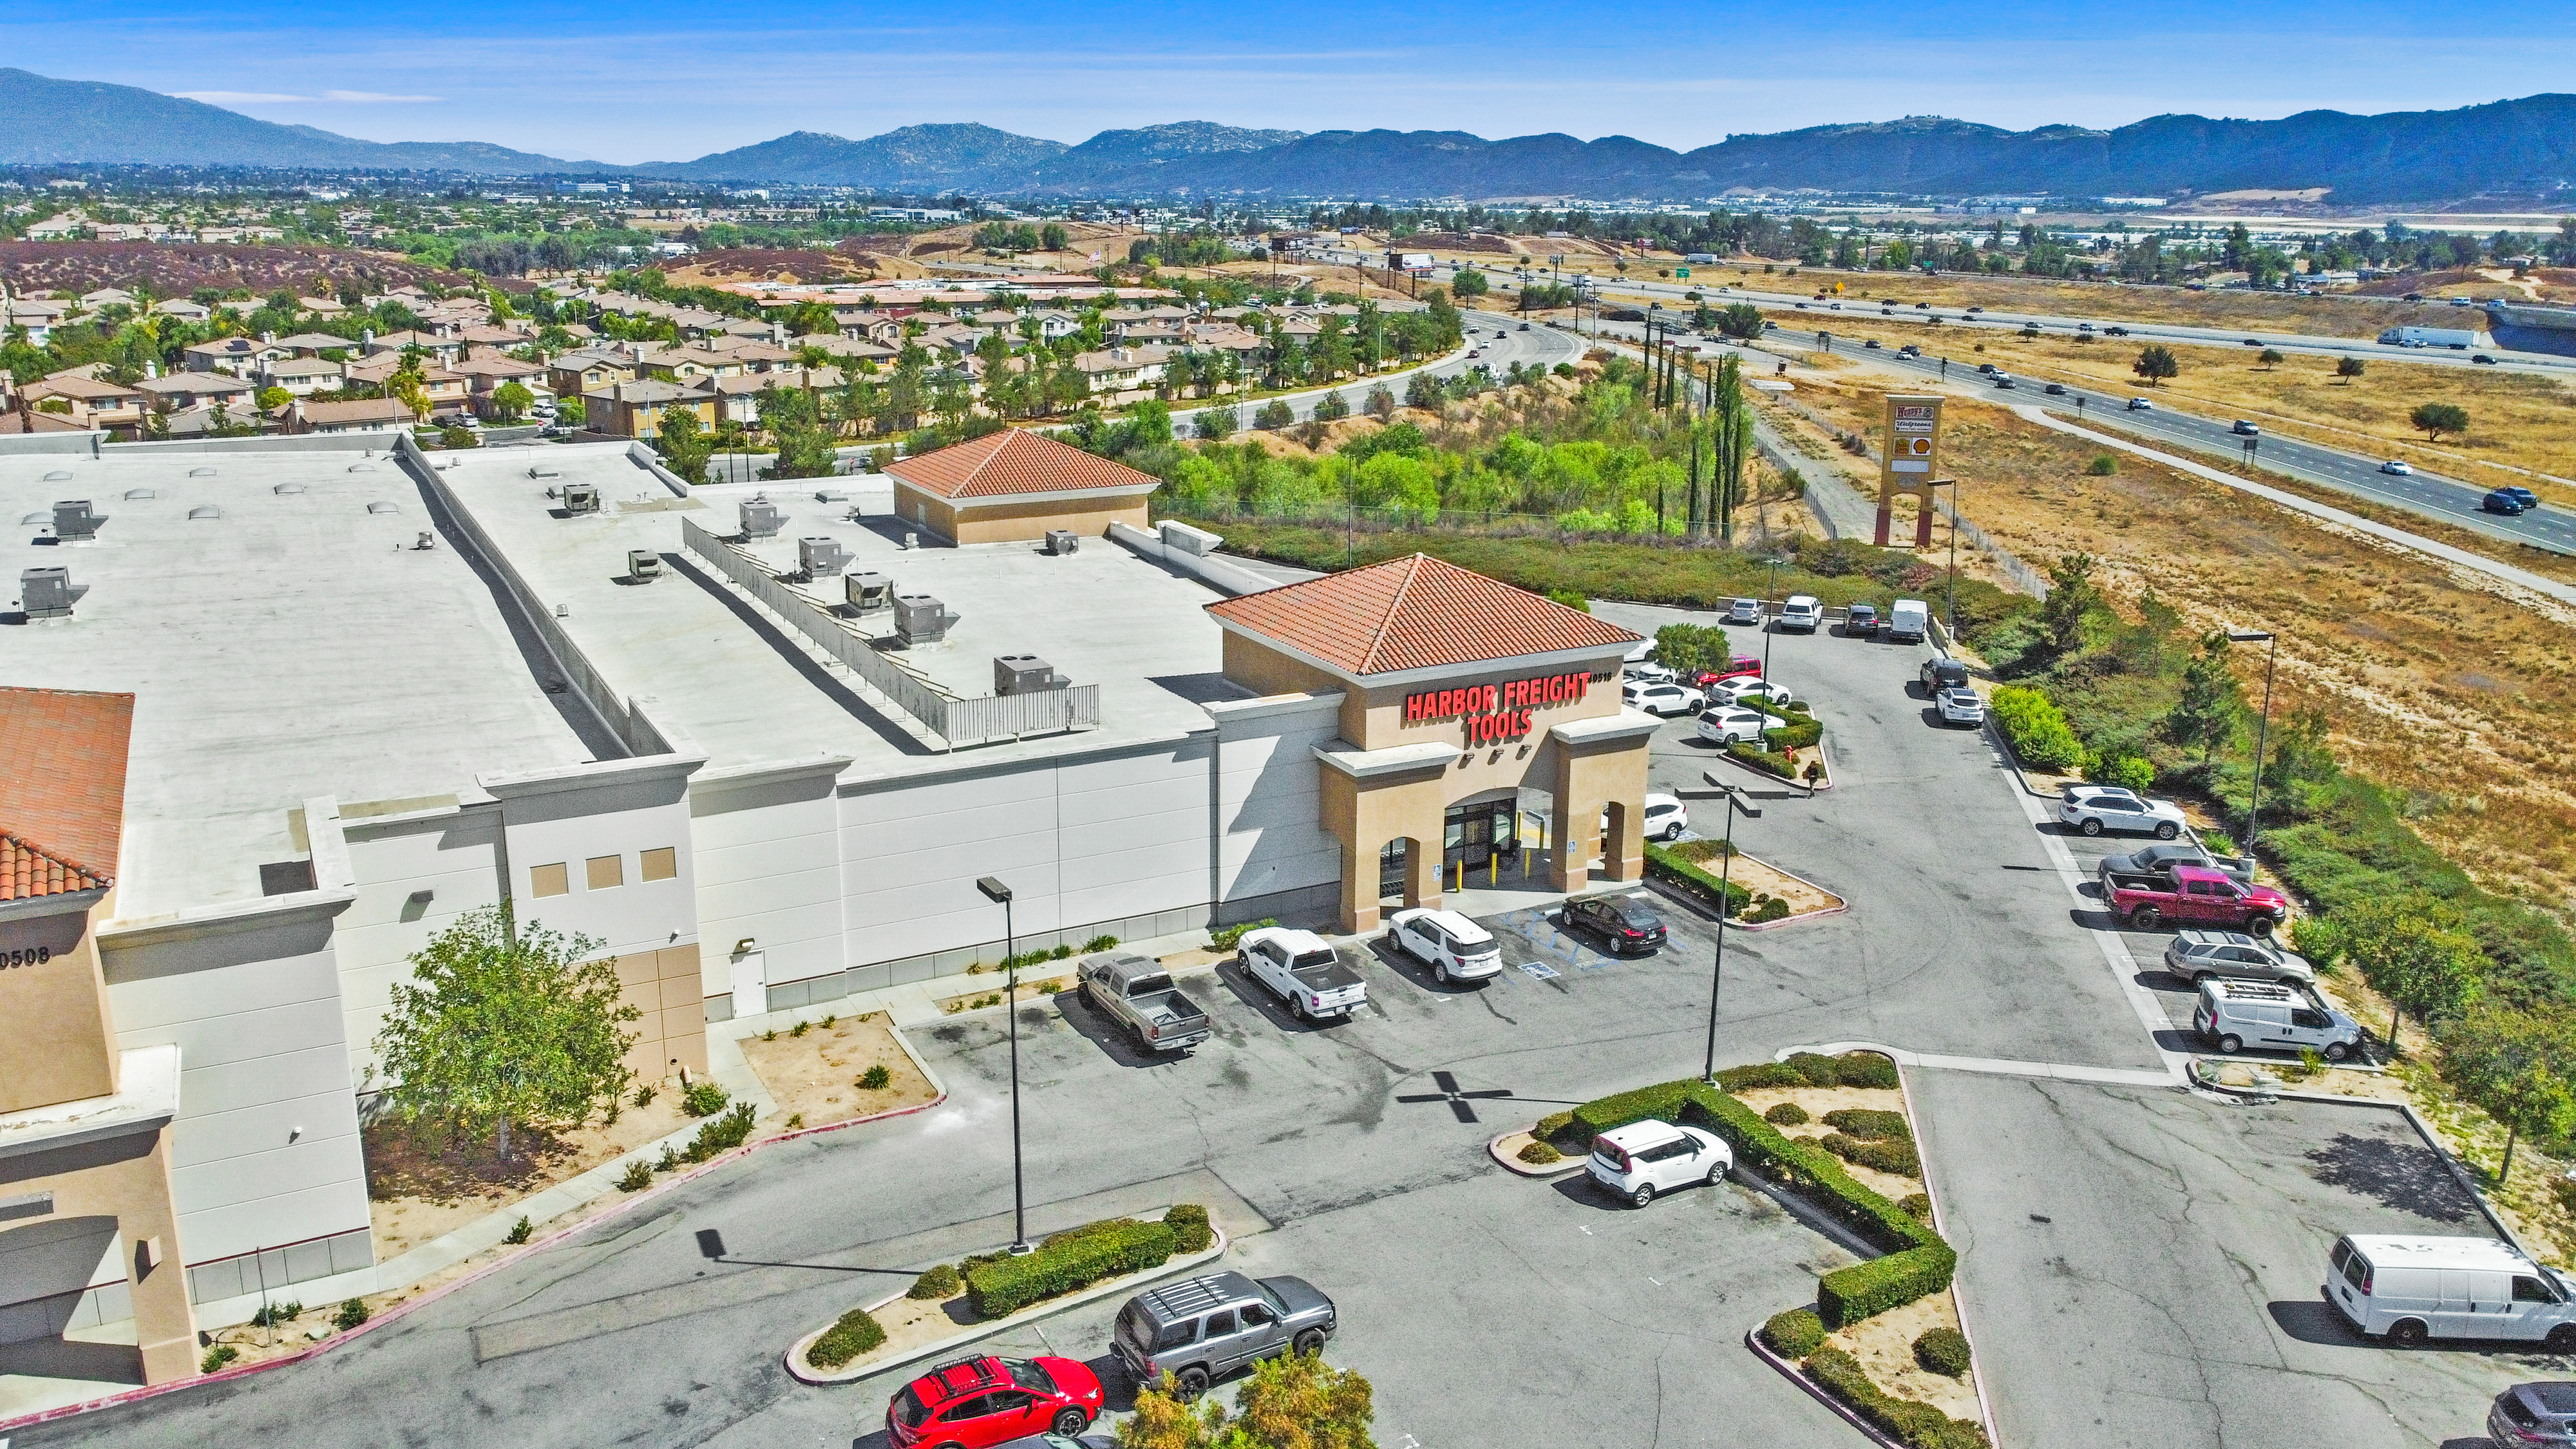 New Listing For Sale – Investor Opportunity – Two unit retail Murrieta Plaza – 100% leased – located along a prime commercial corridor in Murrieta, CA.